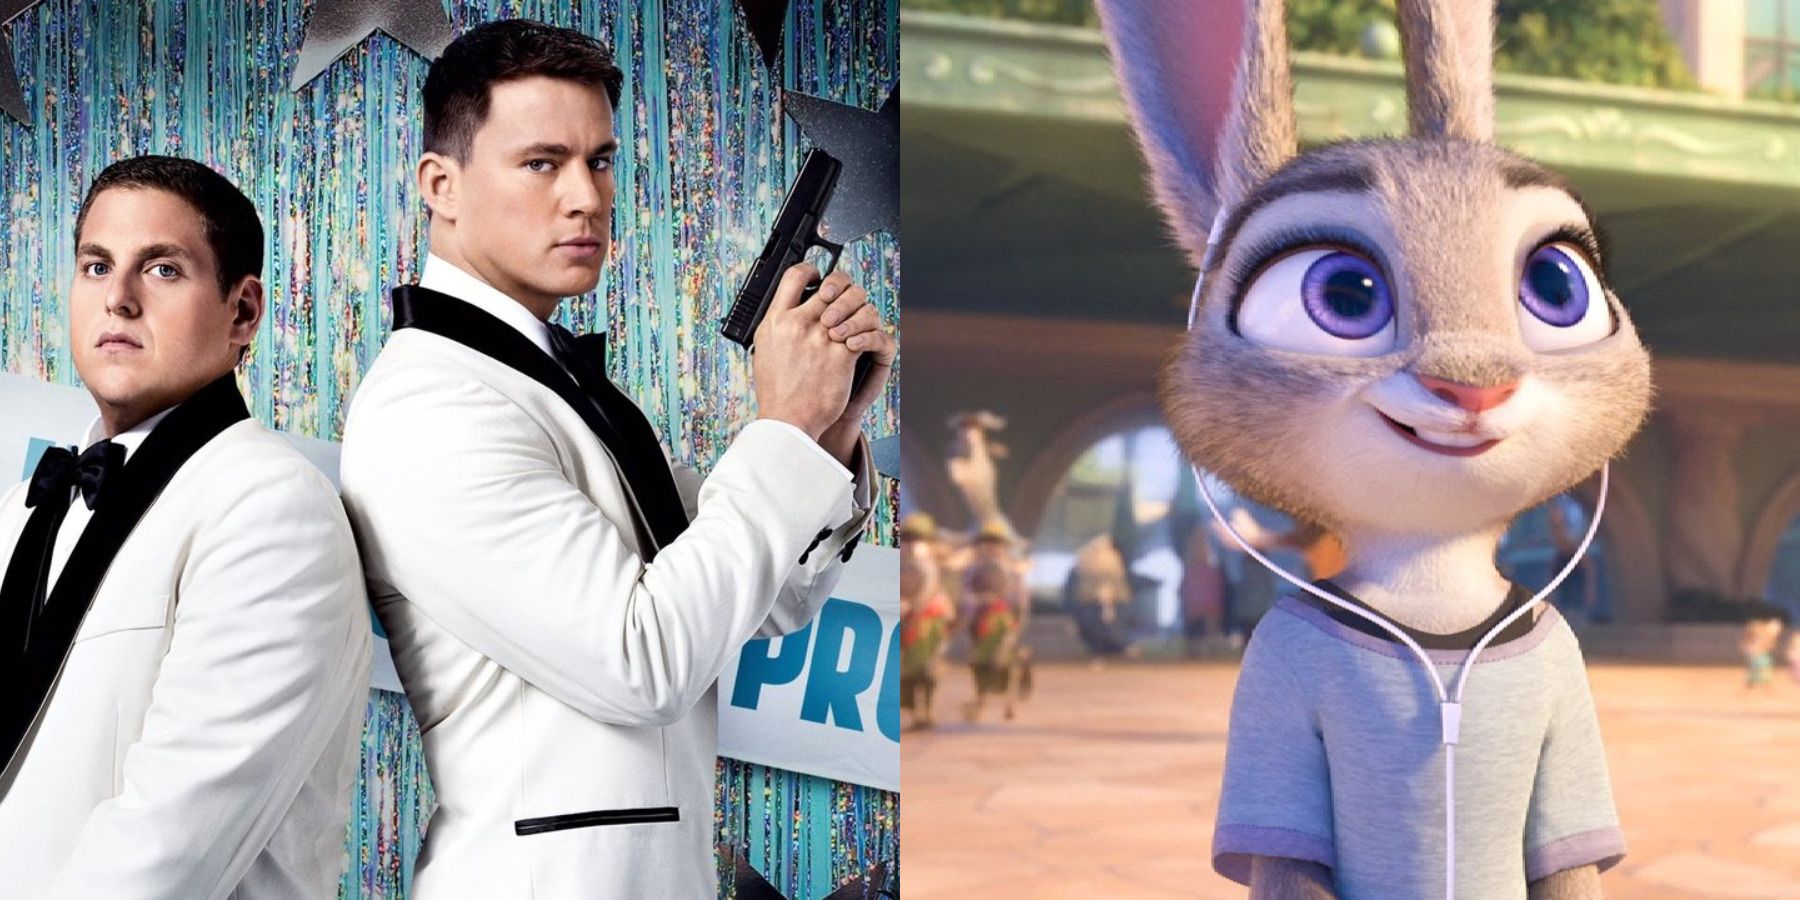 Buddy cop movies feature split image 21 Jump Street and Zootopia